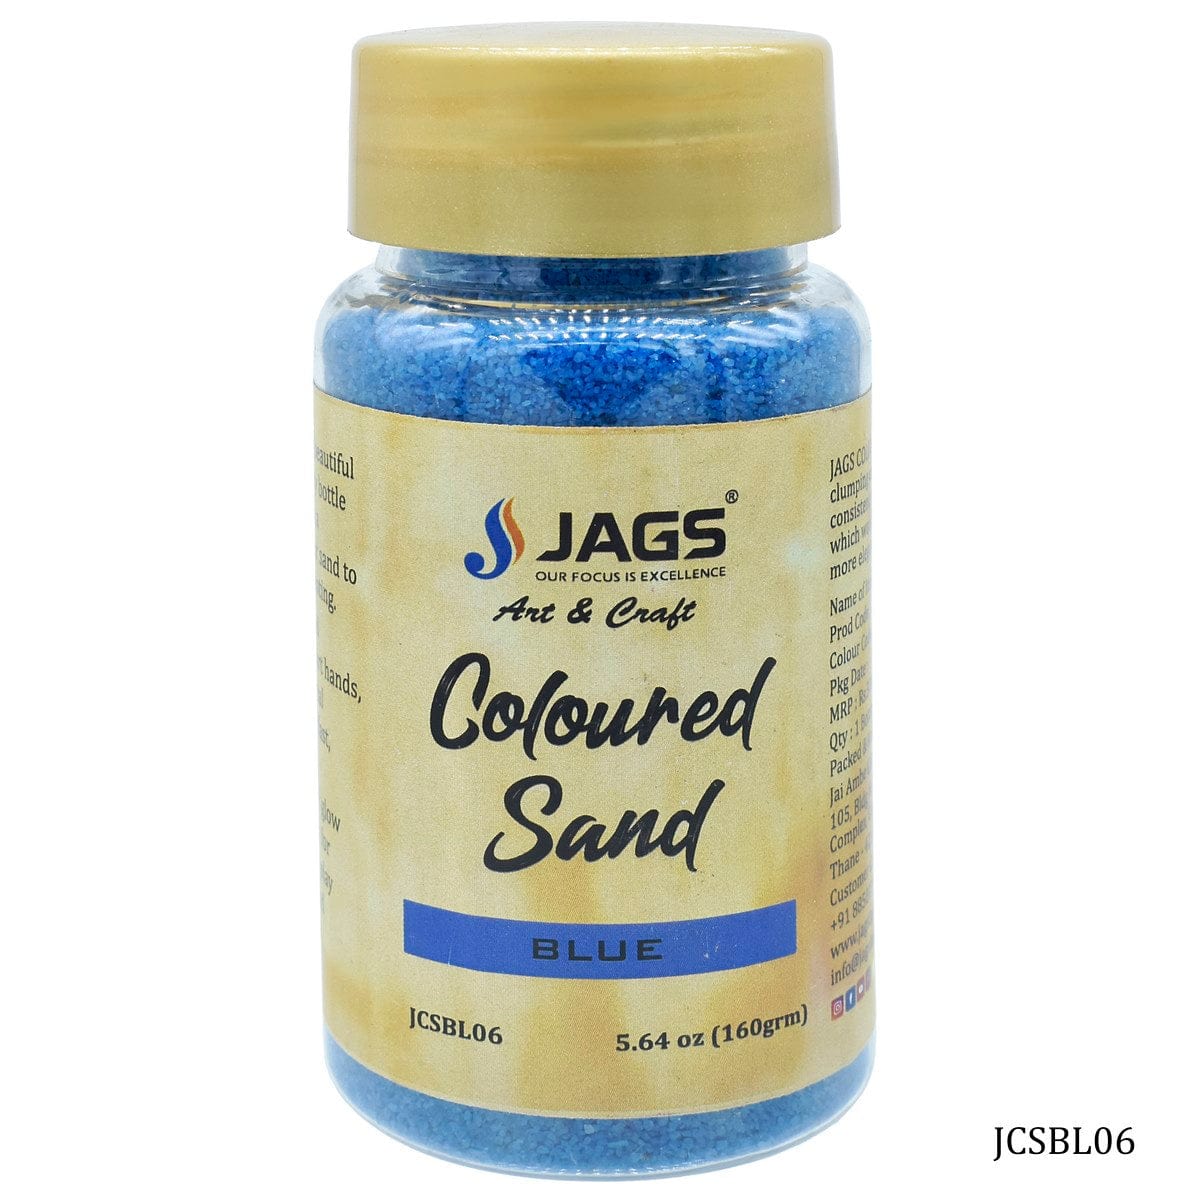 jags-mumbai Sand Jags Coloured Sand 160Gms Blue No 6 - Versatile Craft Sand for Creative Projects